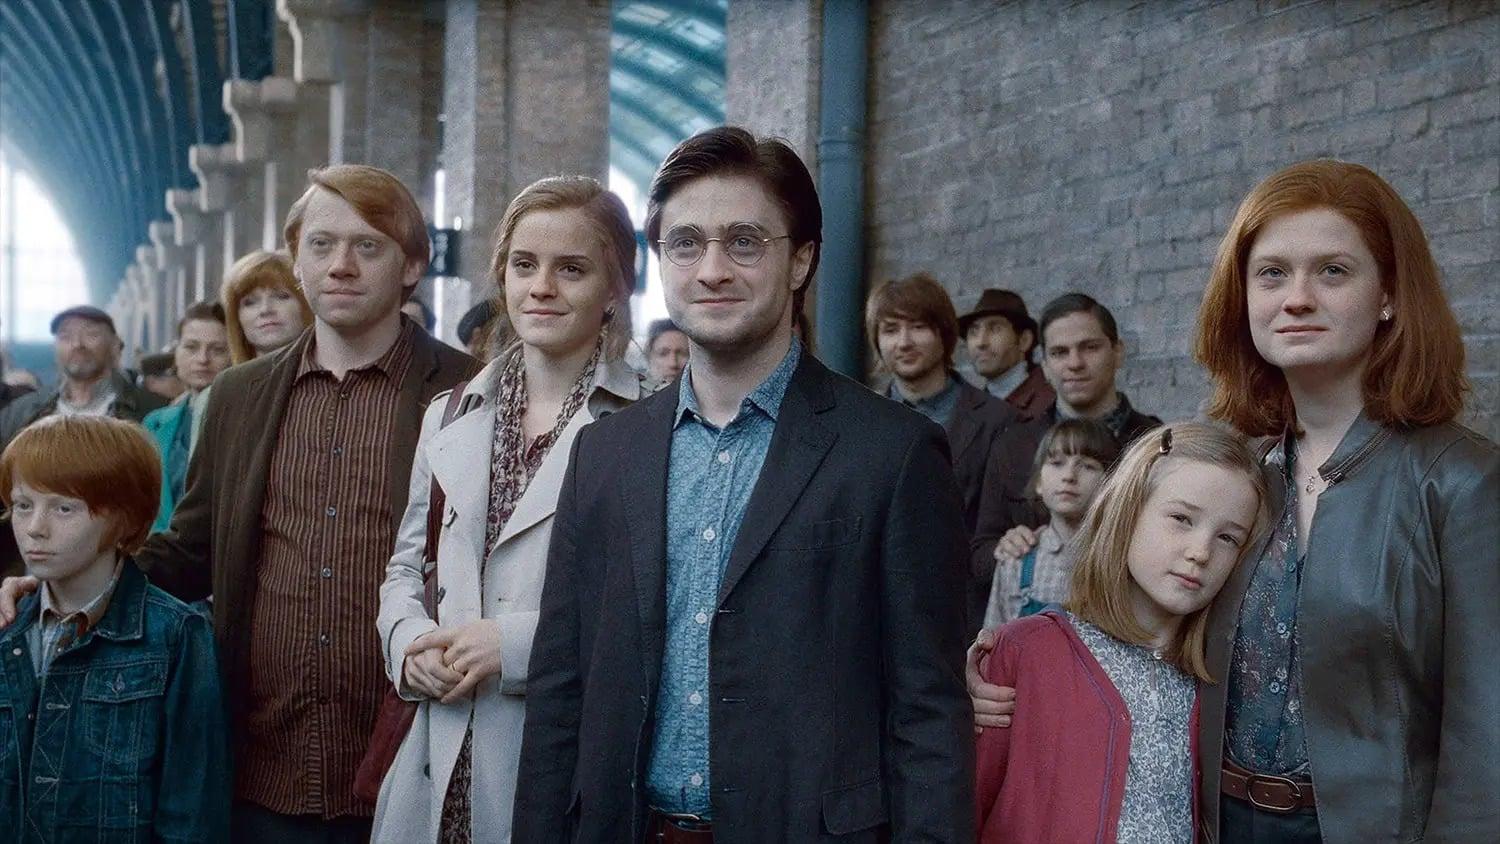 Daniel Radcliffe, Emma Watson, Rupert Grint, and Bonnie Wright at the end of Harry Potter and the Deathly Hallows Part II.